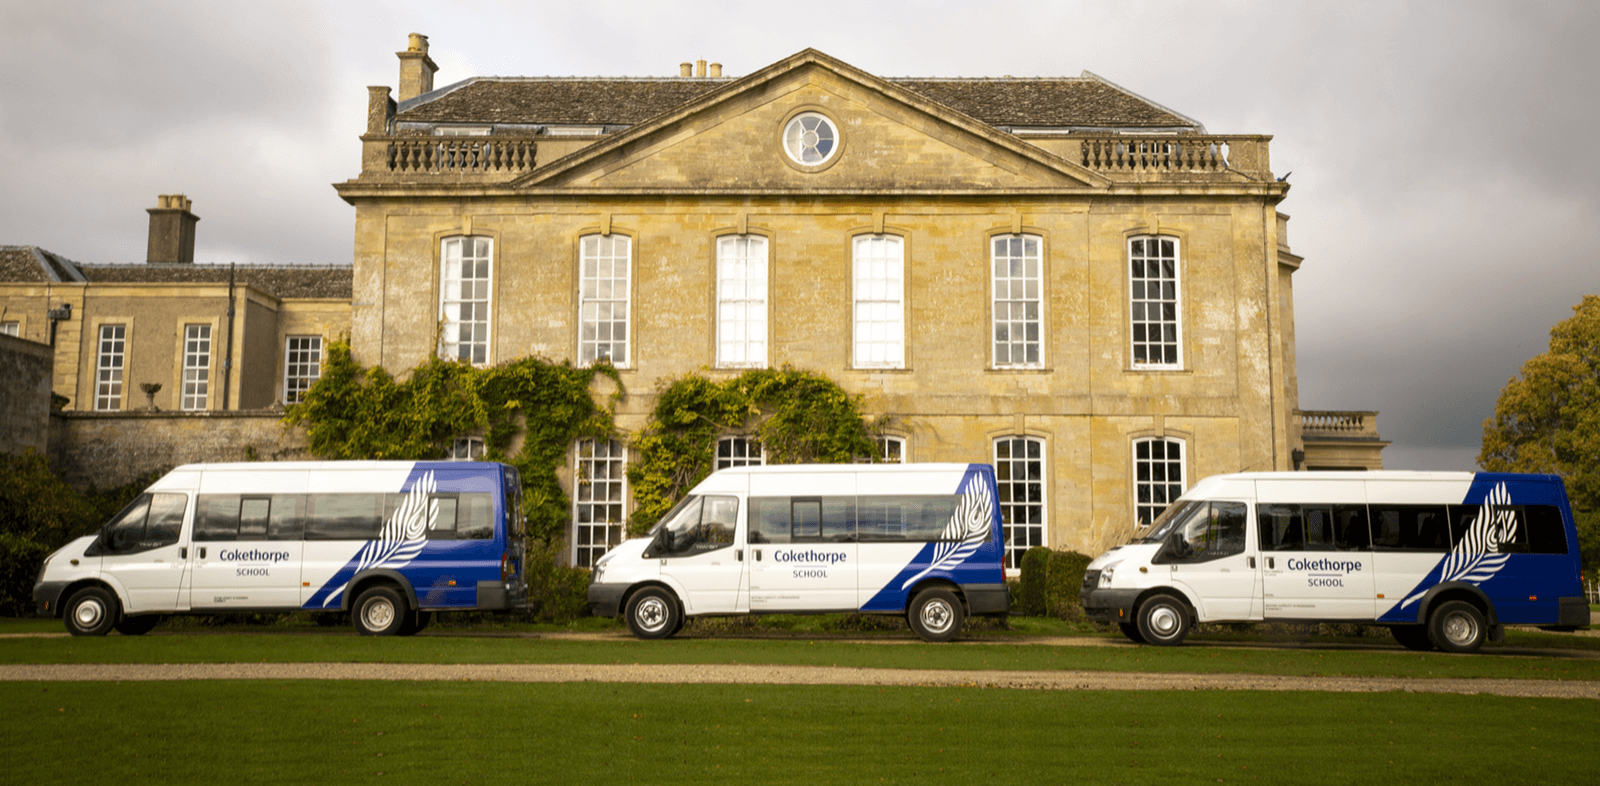 Cokethorpe Minibusses parkewd outsode Mansion House - Cokethorpe's Transport Network - An Independent Day School